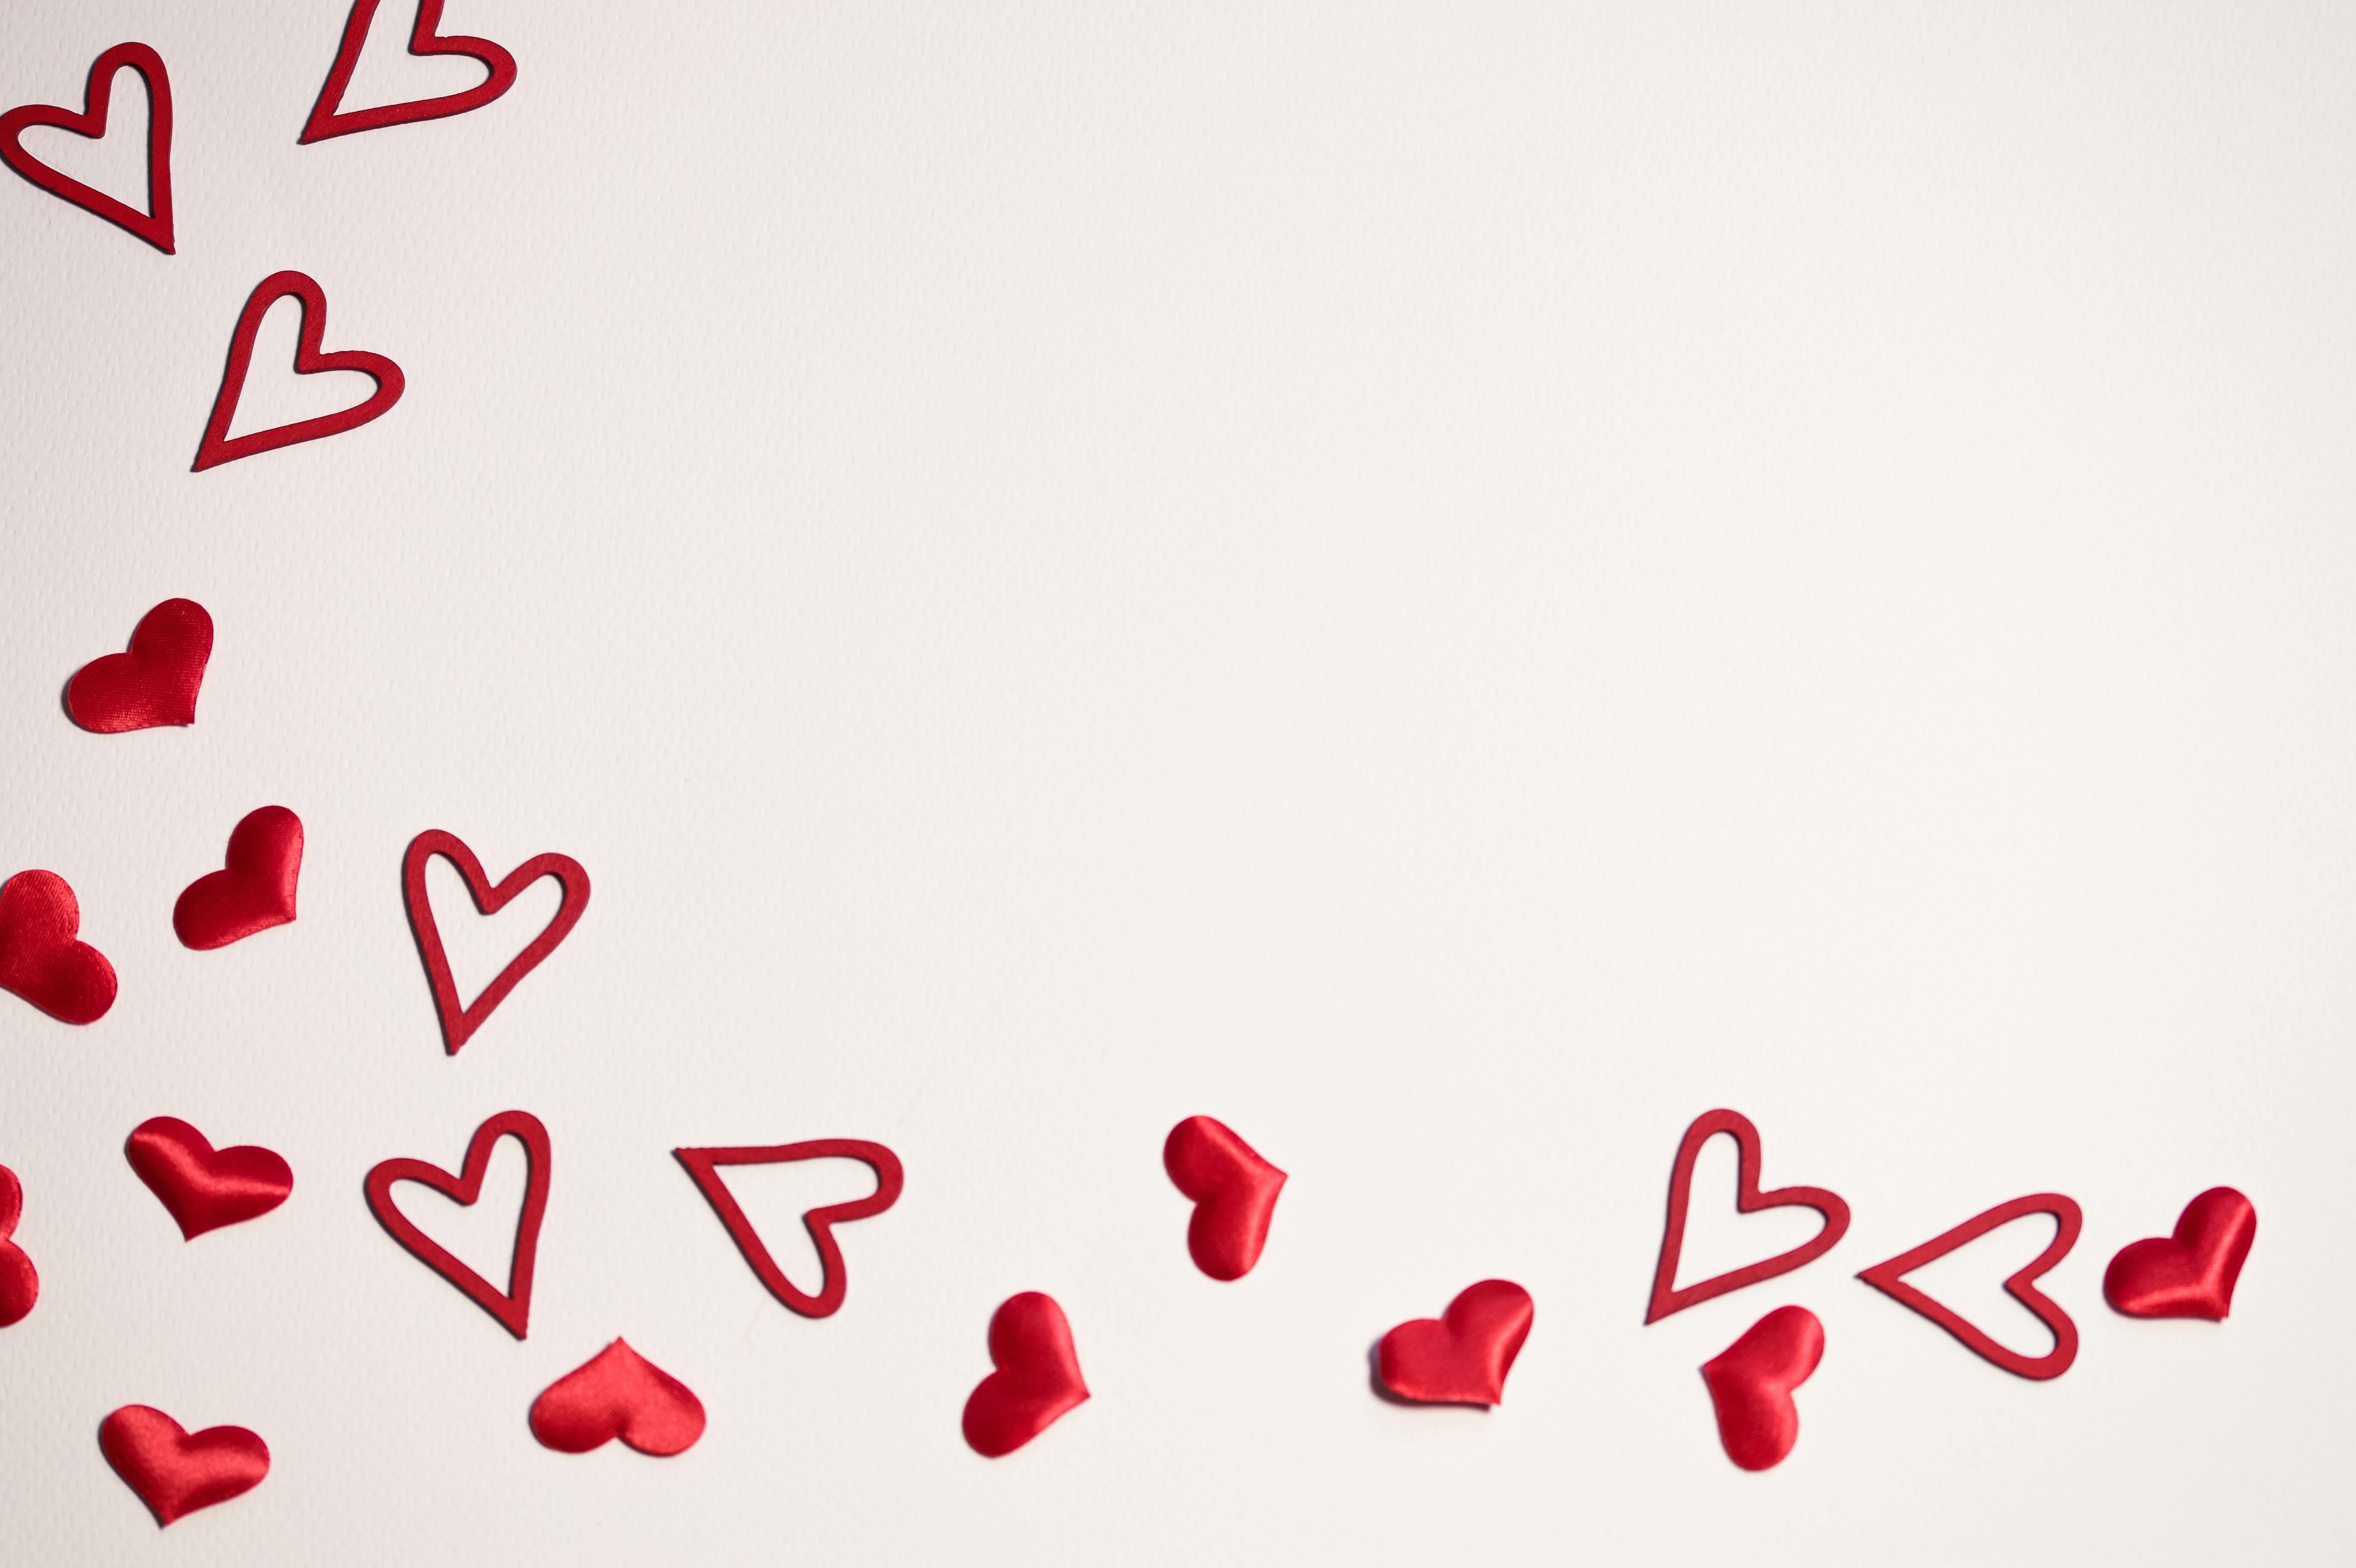 Valentine's day - rose and the paper hearts cut outs 2K wallpaper download